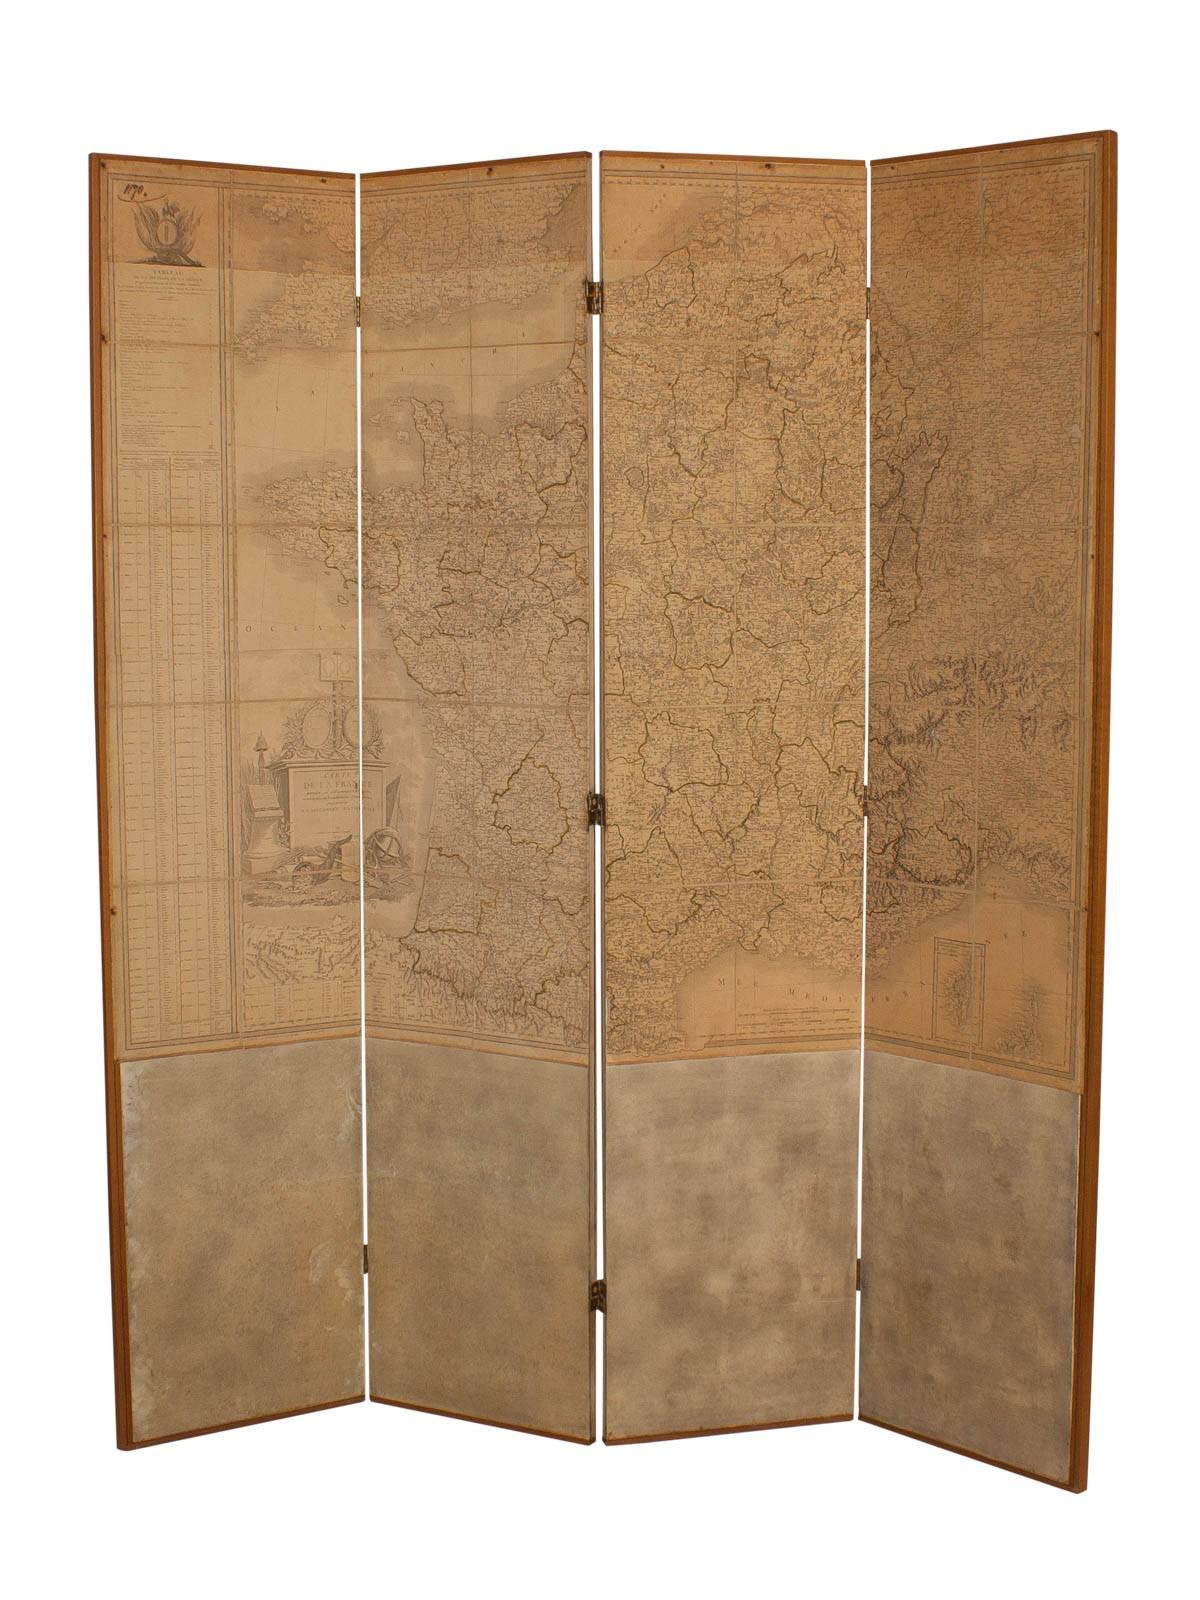 French Large Antique Map of France Mounted on a Screen, circa 1810